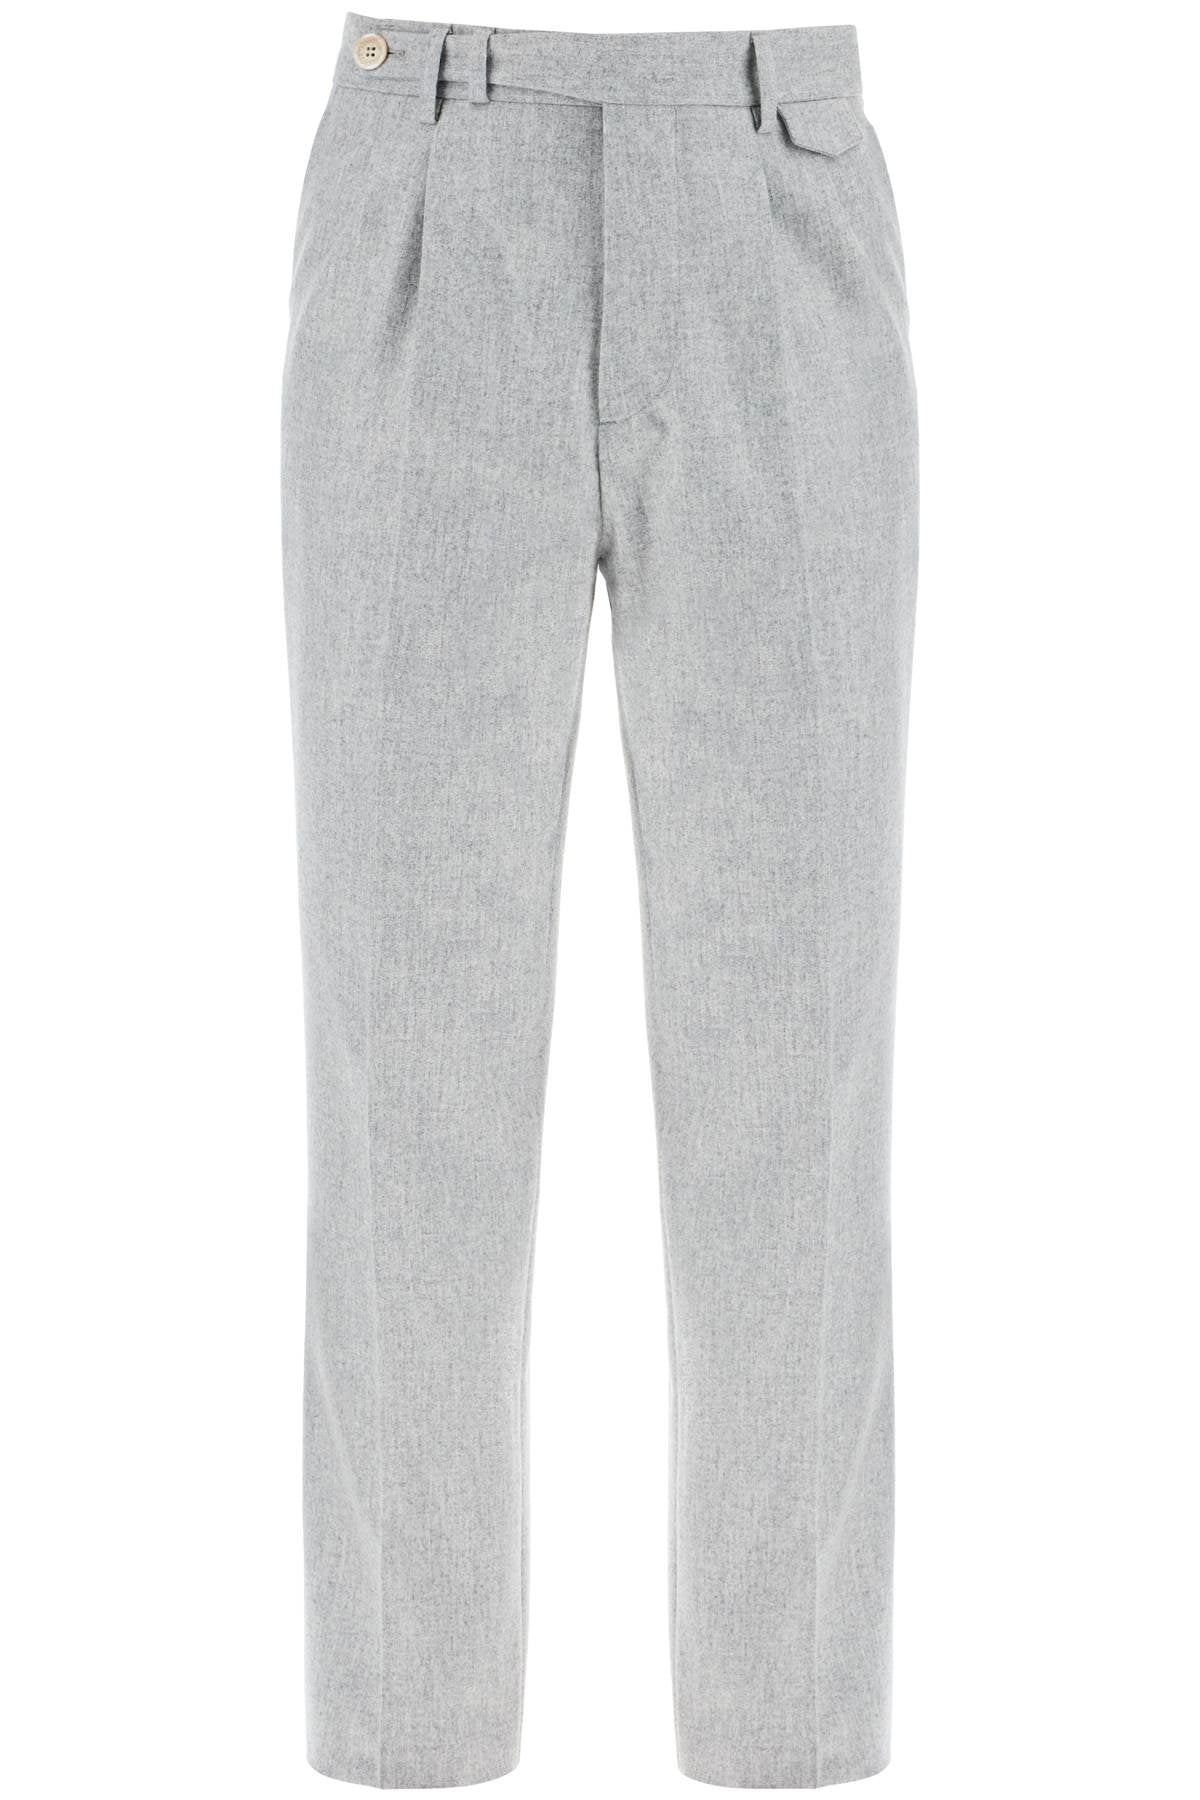 Brunello Cucinelli "flannel leisure fit pants for - Grey